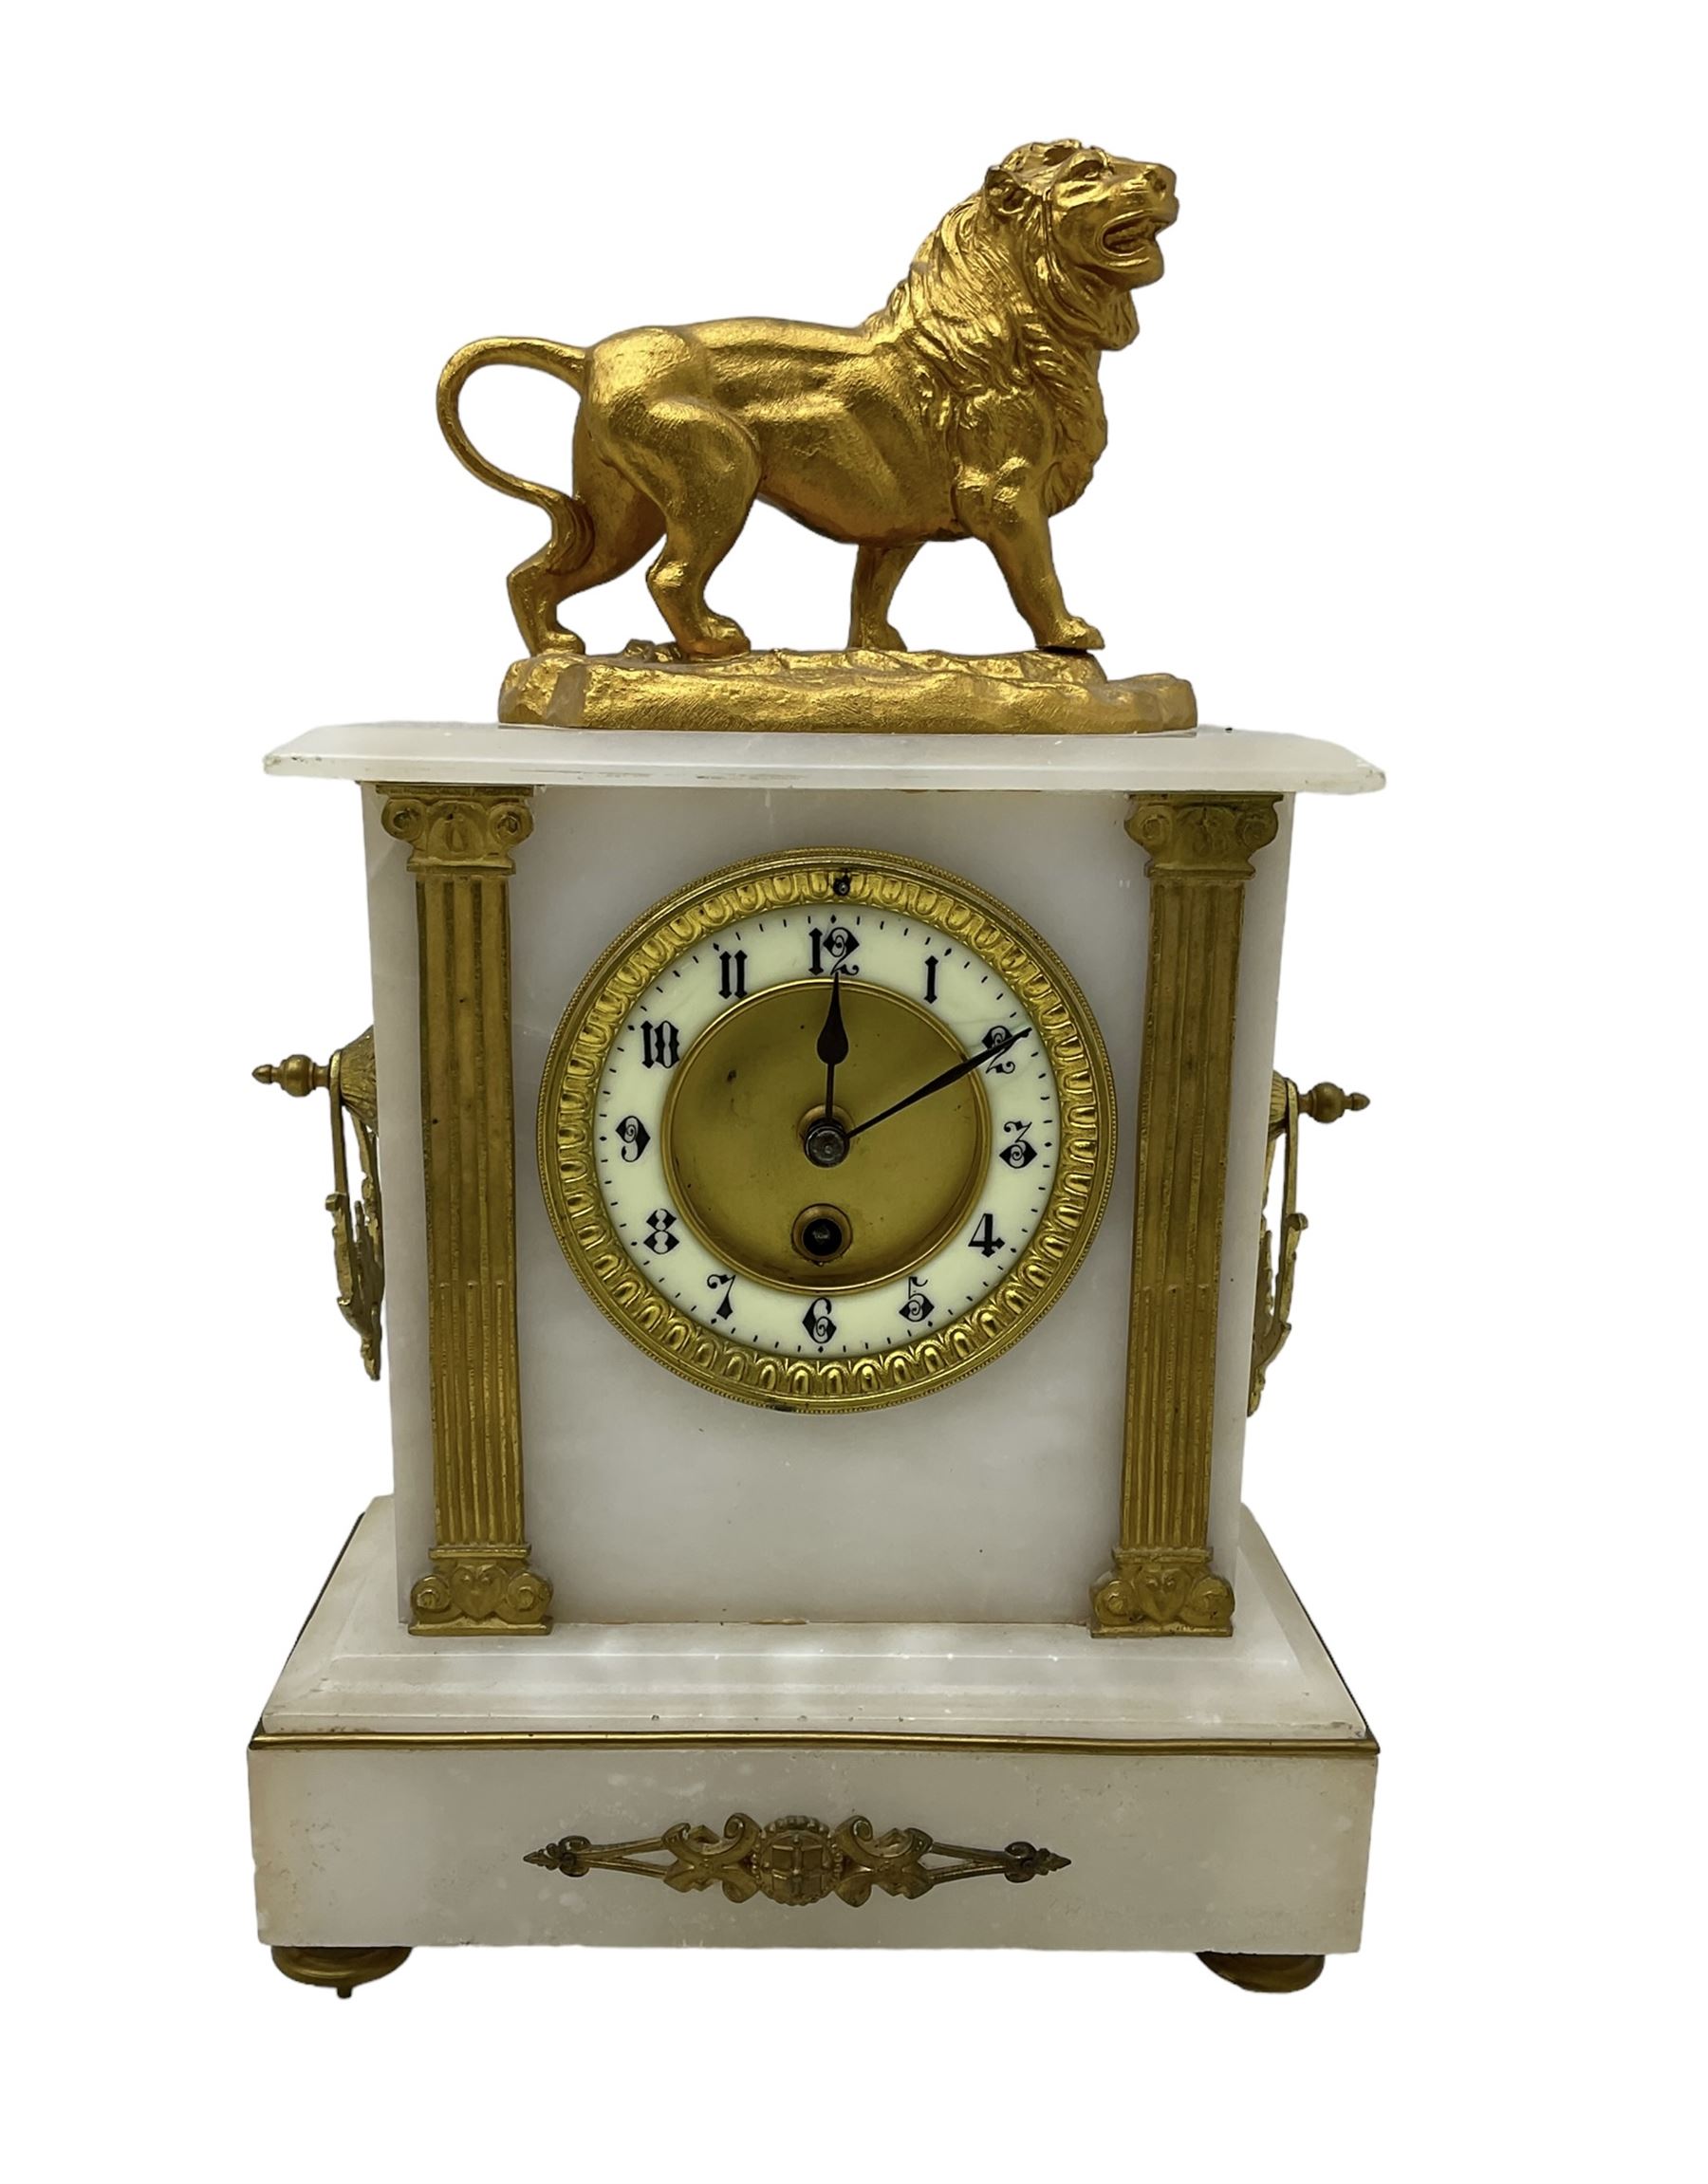 French - mid 19th century 8-day mantle clock in an alabaster case with a flat top surmounted by a gi - Image 2 of 4